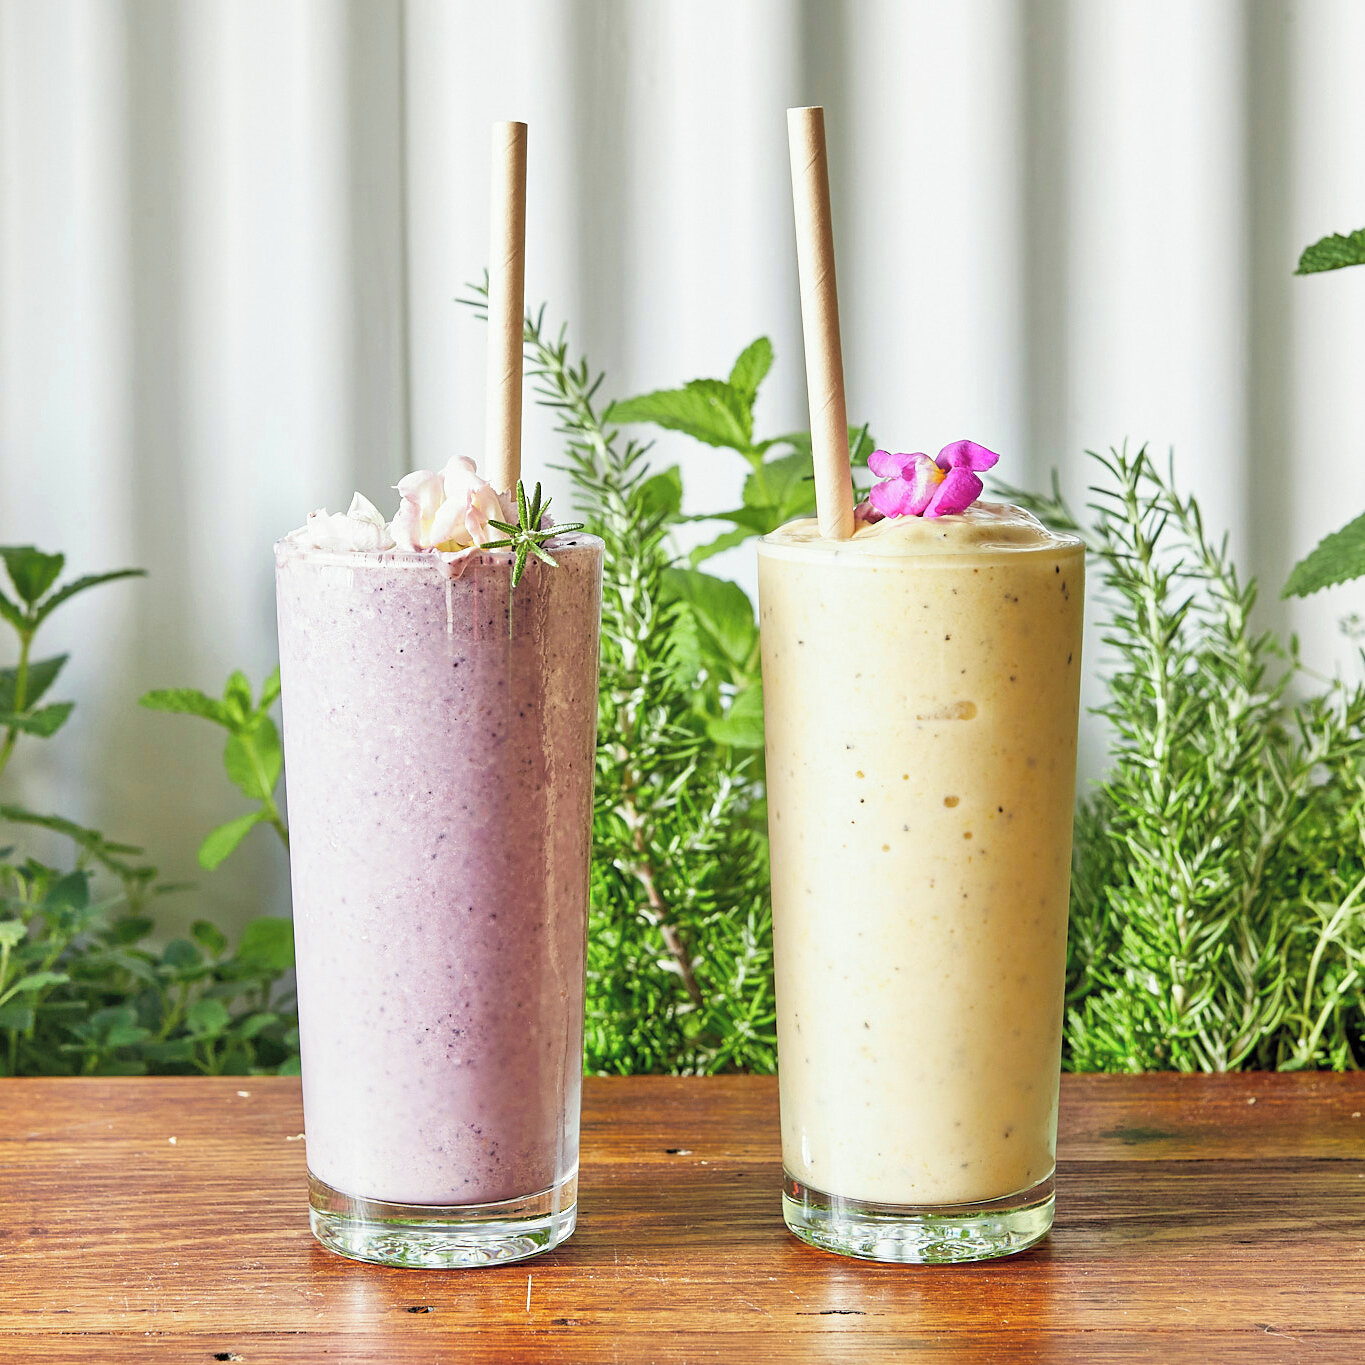 It's officially Summer and that means more smoothies! 🥤 It's basically an unspoken rule, don't you think? 🤔